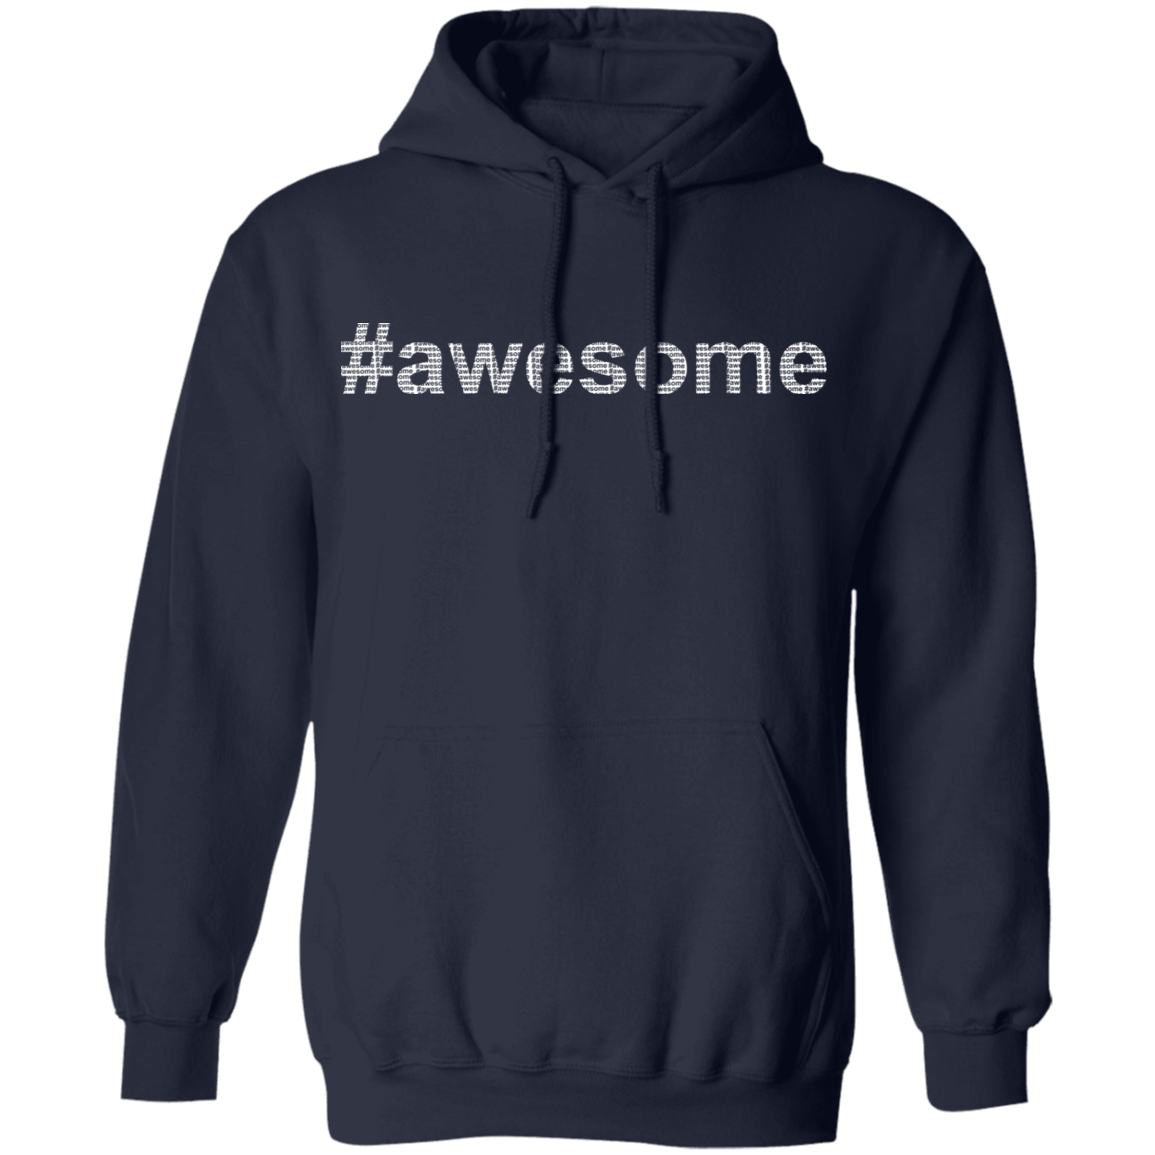 Awesome White Font Hoodie - Happy Spring Tee free shipping